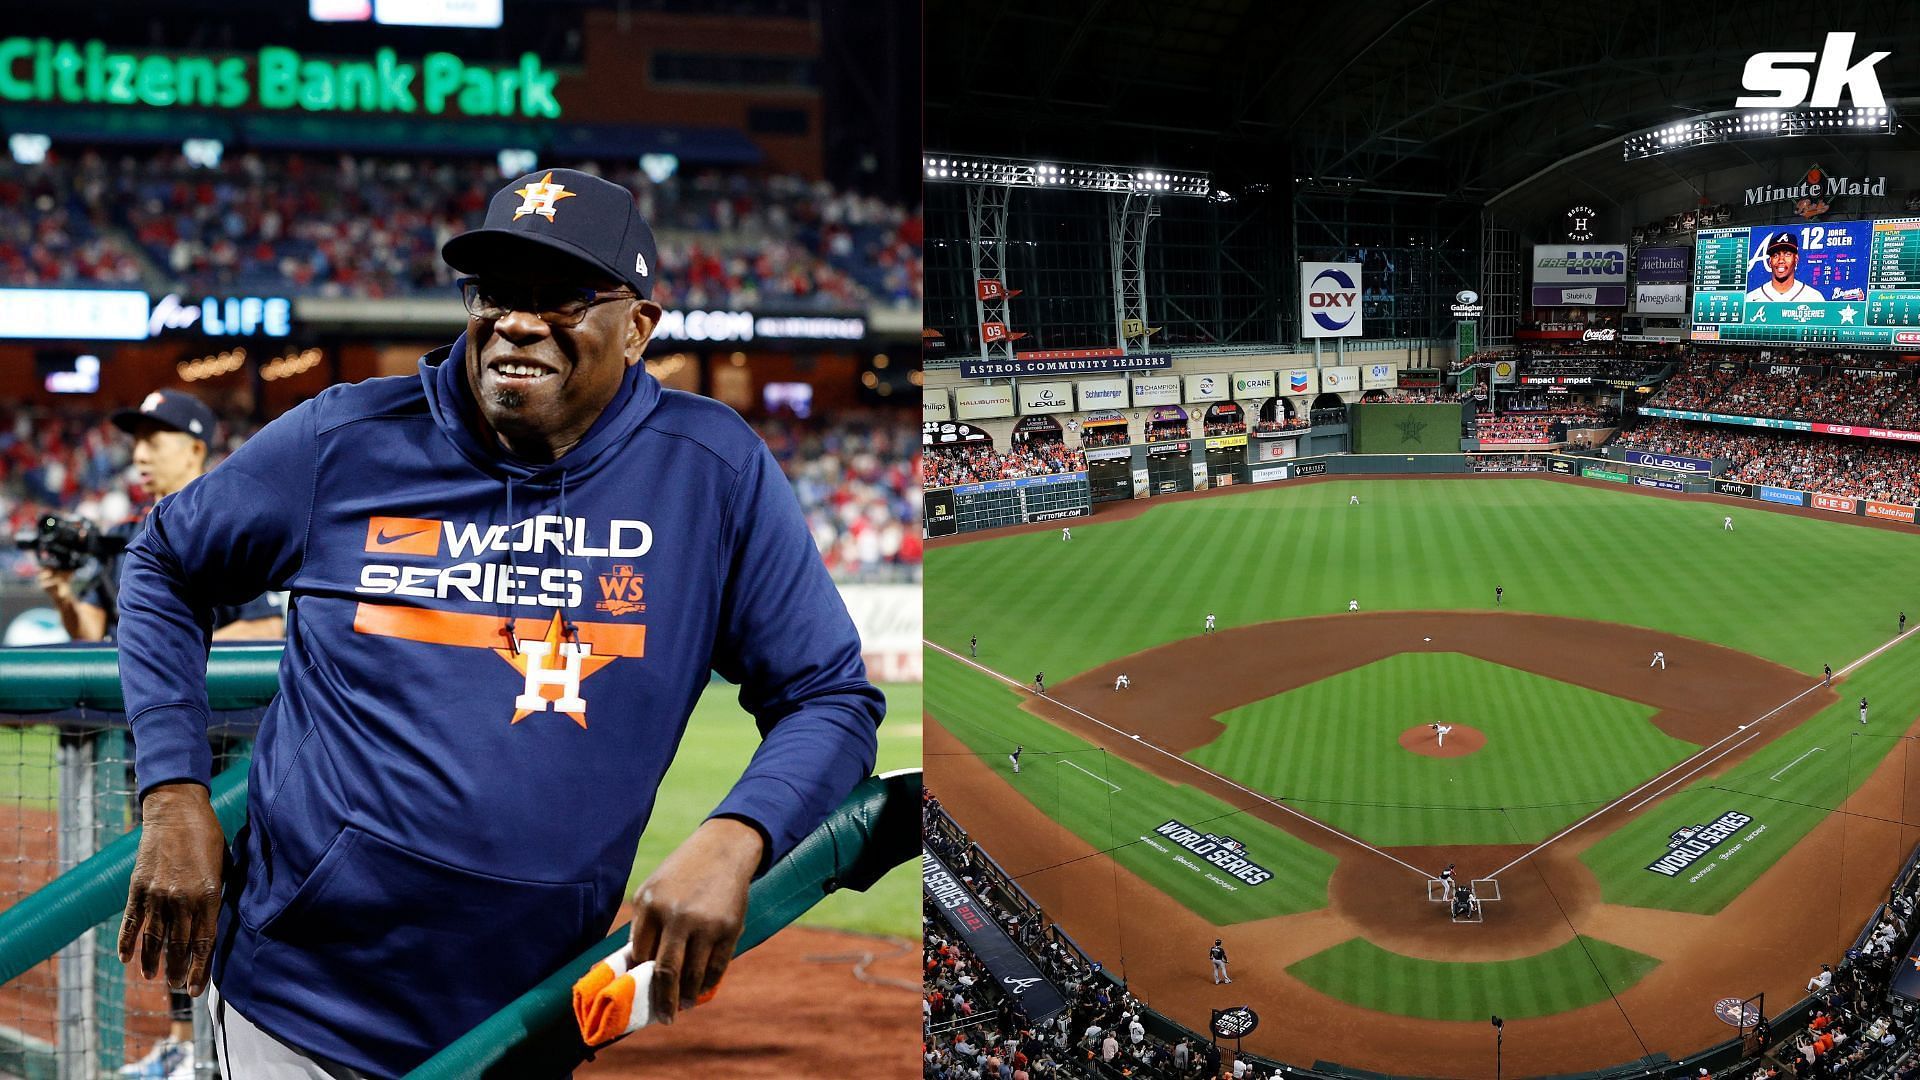 It was a league decision - Houston Astros manager Dusty Baker